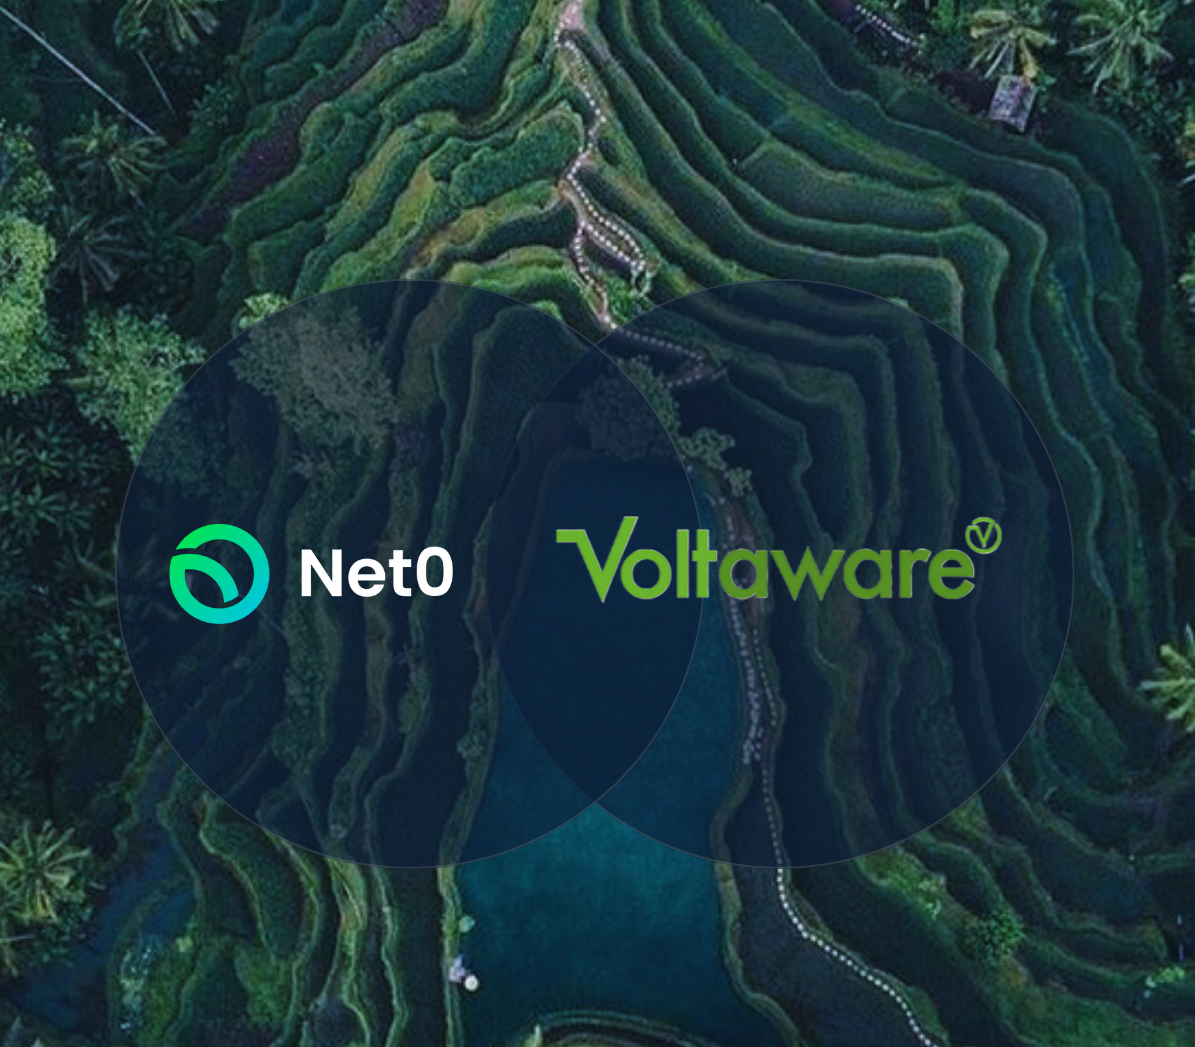 Voltaware\'s Partnership with Net0: An In-Depth Case Study